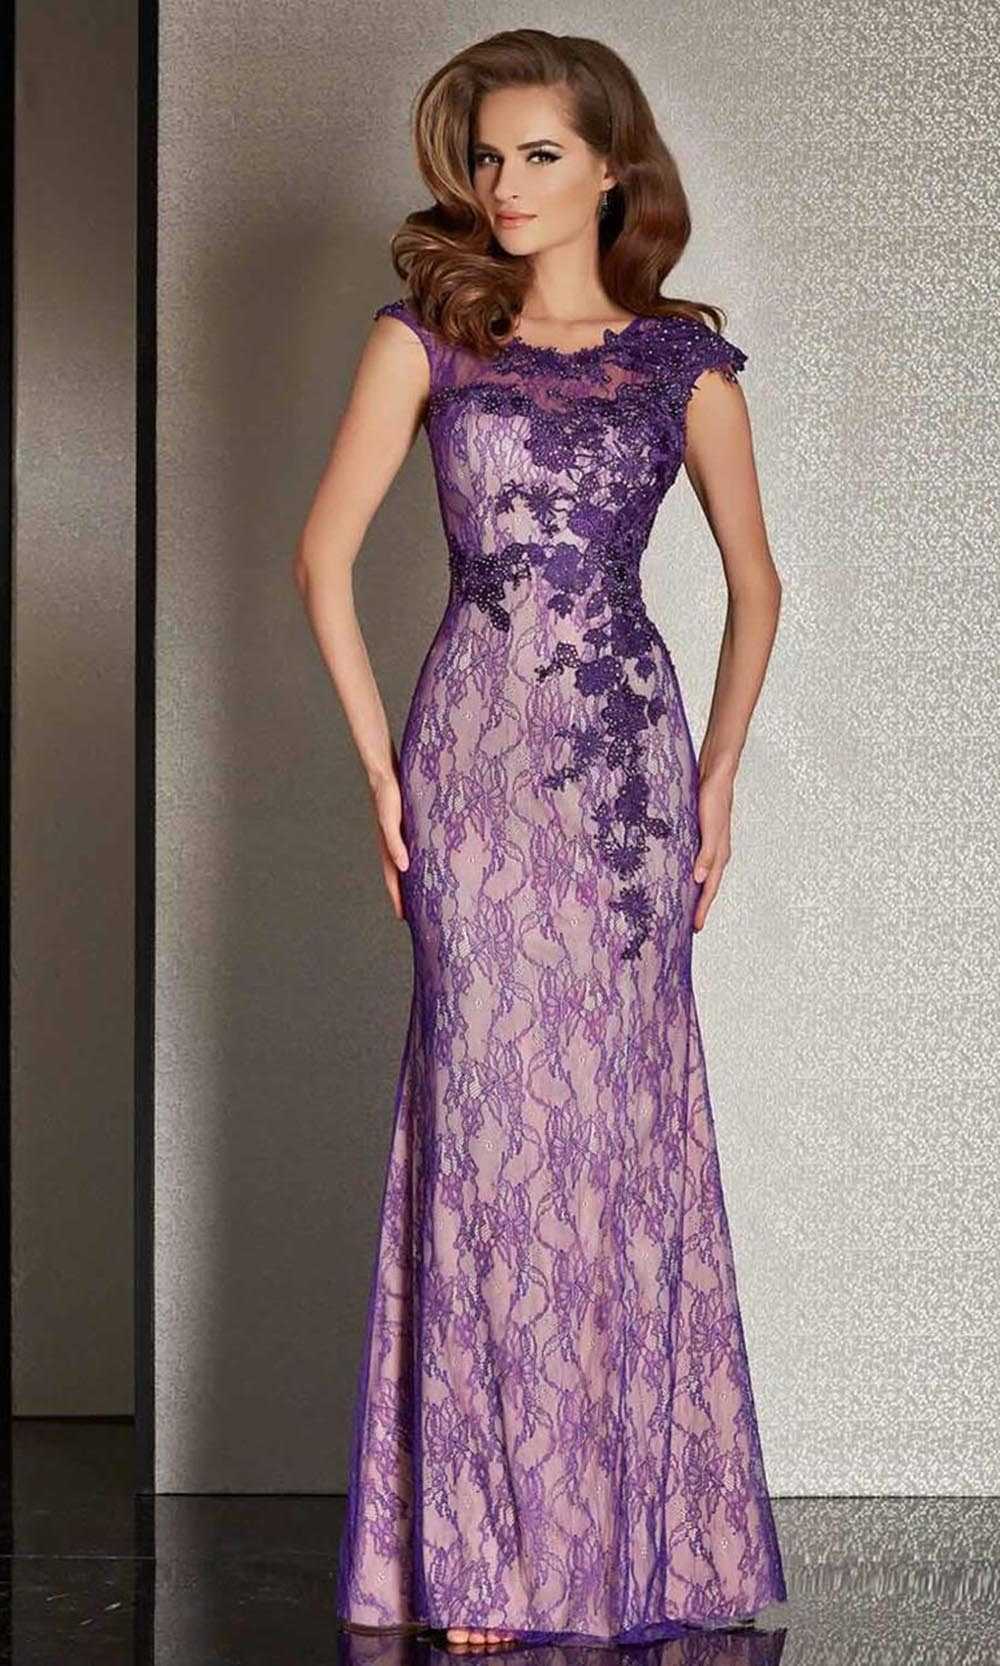 Clarisse, Clarisse - Illusion Jewel Lace Trumpet Gown M6236 - 1 pc Purple/Nude In Size 6 Available